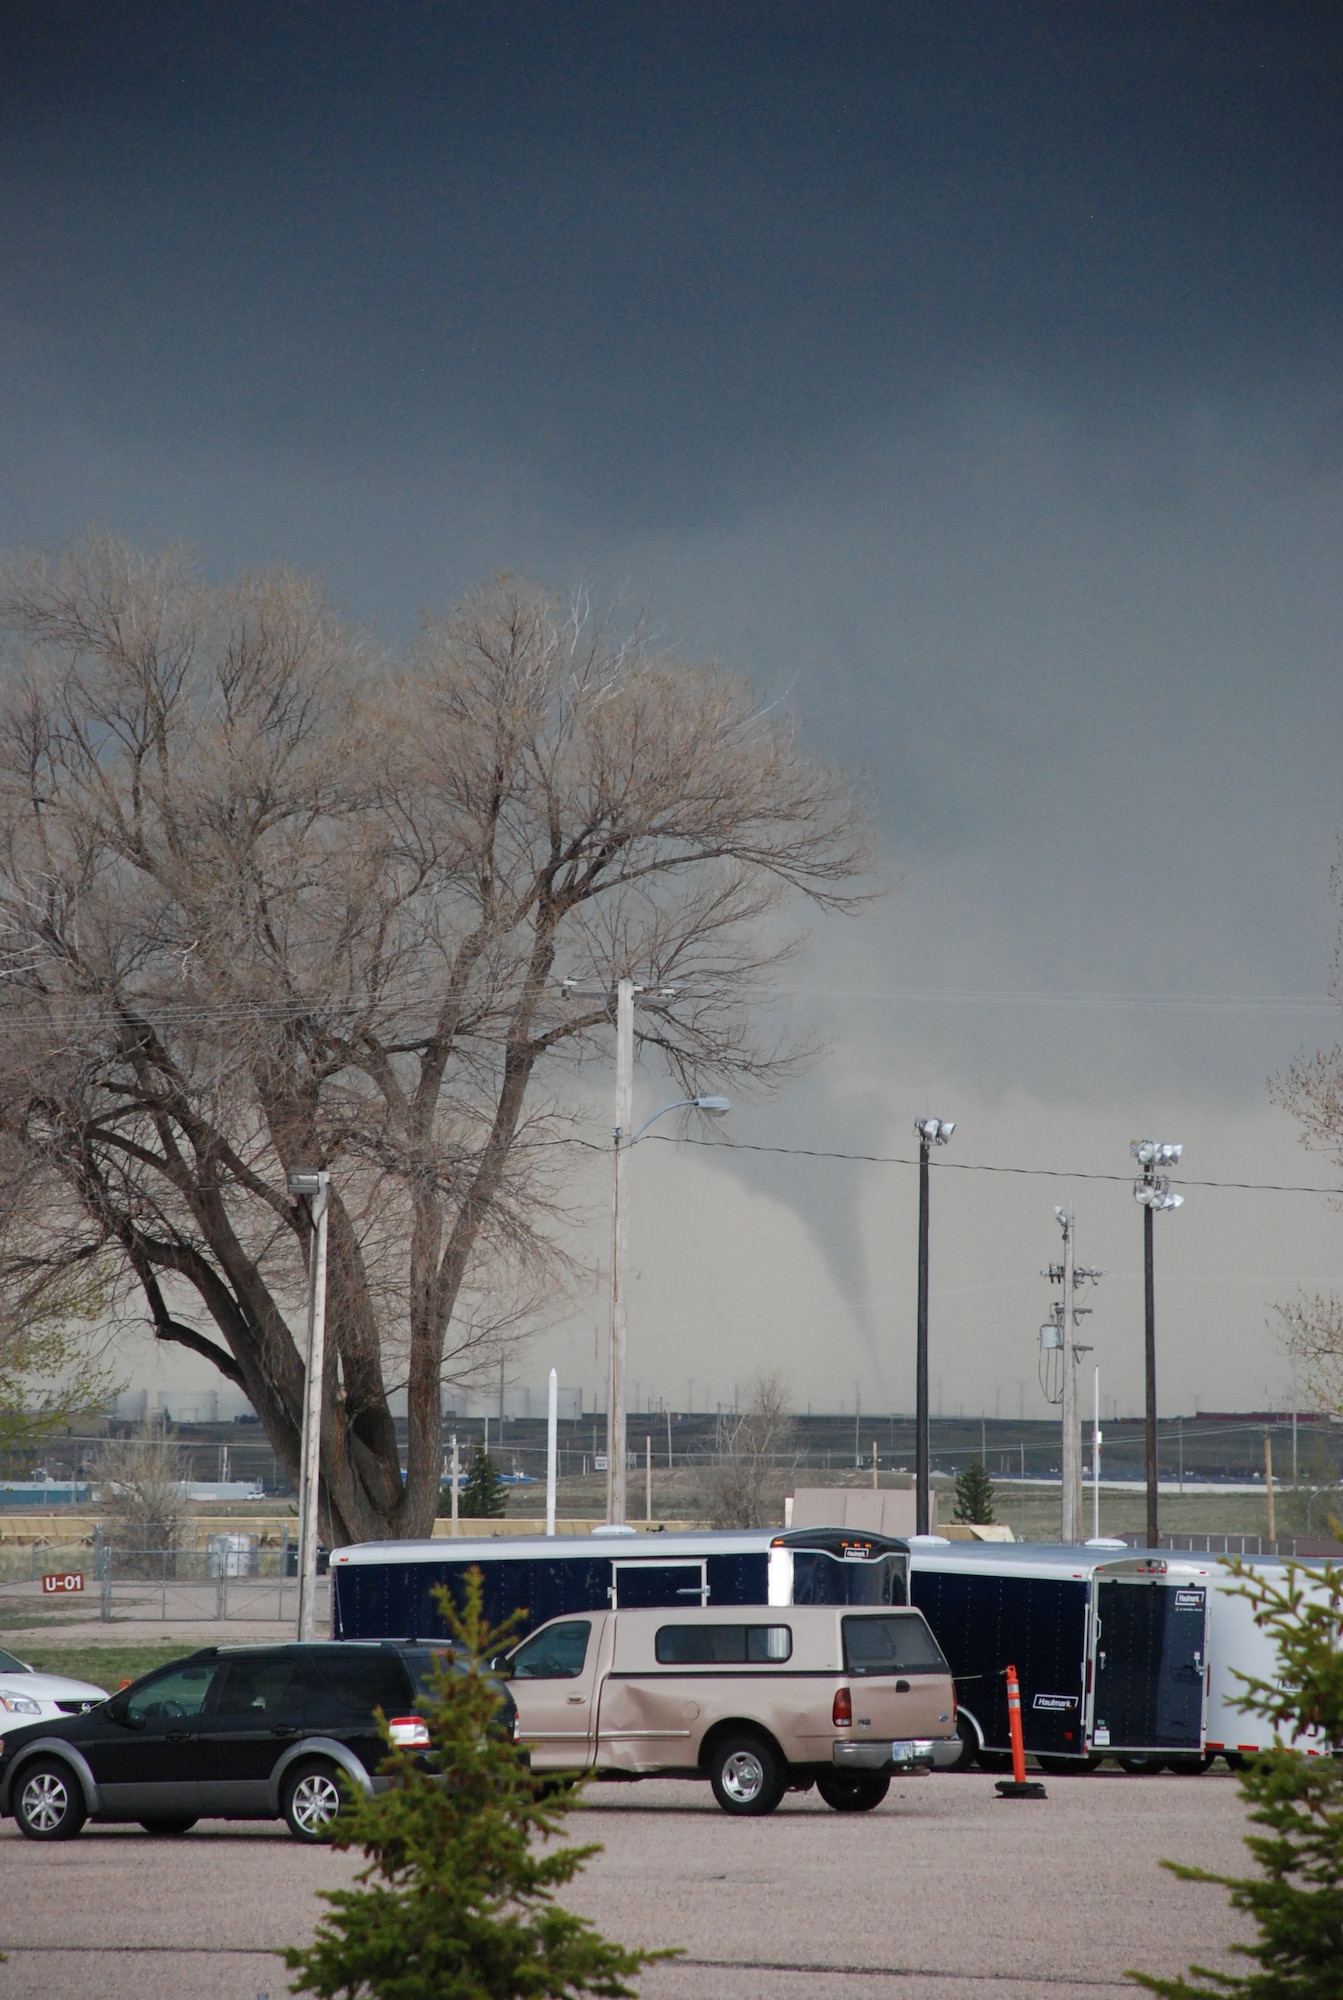 A tornado touches down roughly six miles southeast of the base May 18. A tornado warning was issued shortly after the sighting, and base personnel were directed to seek shelter in place. (U.S. Air Force photo/Staff Sgt. Chad Thompson)